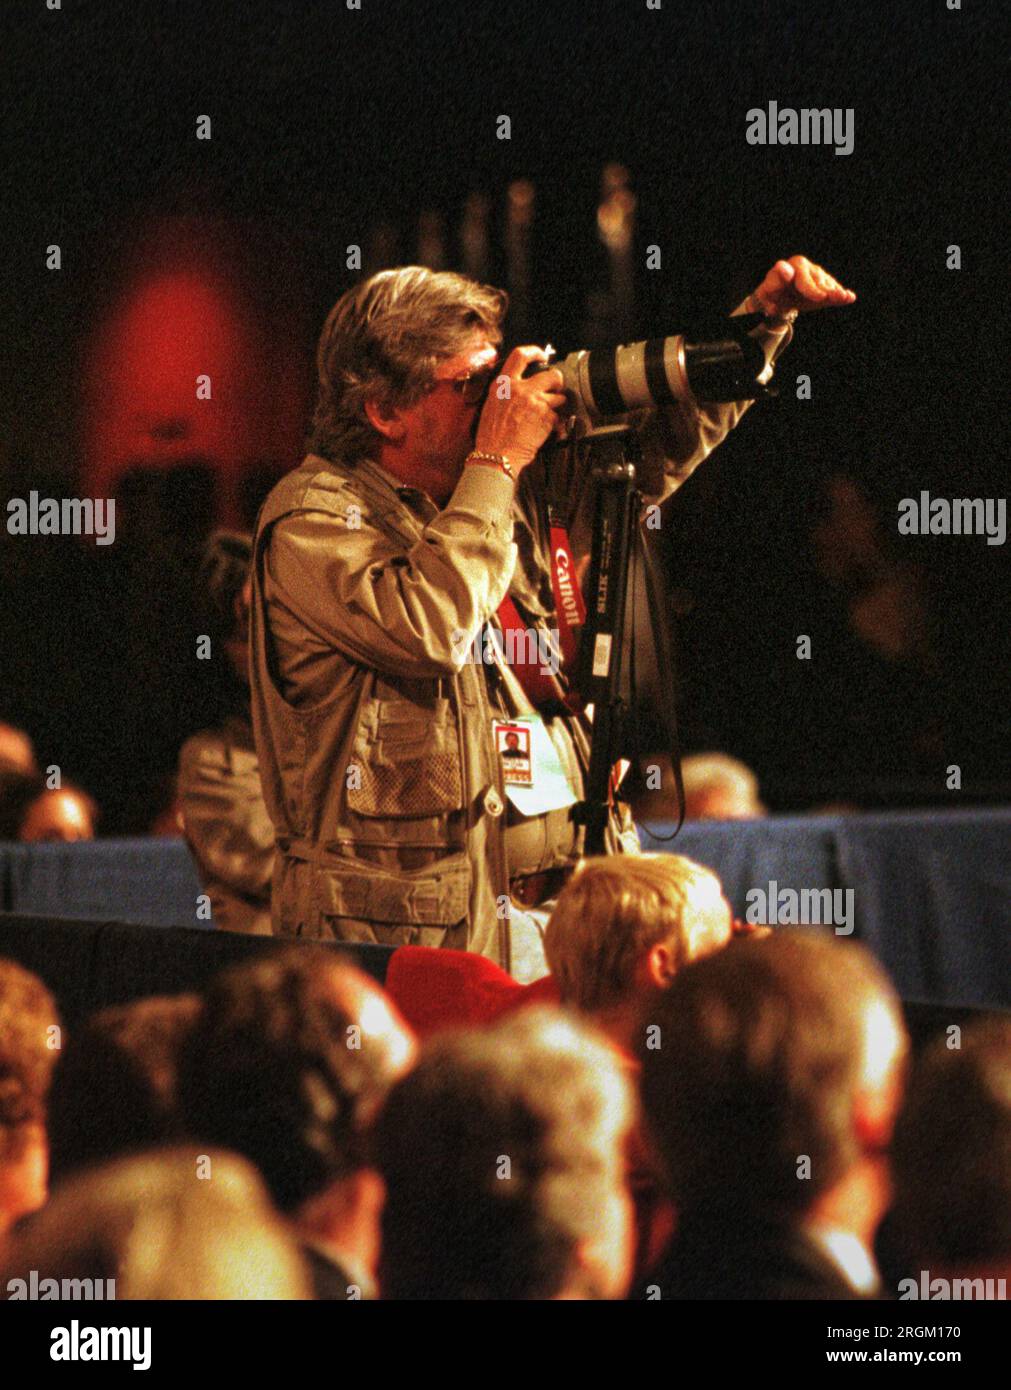 Veteran TIME magazine photojournalist Dirck Halstead photographs President Bill Clinton as part of the traveling White House press pool on Monday, Aug. 10, 1998 at the Commonwealth Convention Center in Louisville, Jefferson County, KY, USA. Louisville was on the first leg of a scheduled three-day trip by the president which ended up being cut short a day due to the Aug. 7 terrorist bombings of two United States embassies in East Africa. (Apex MediaWire Photo by Billy Suratt) Stock Photo